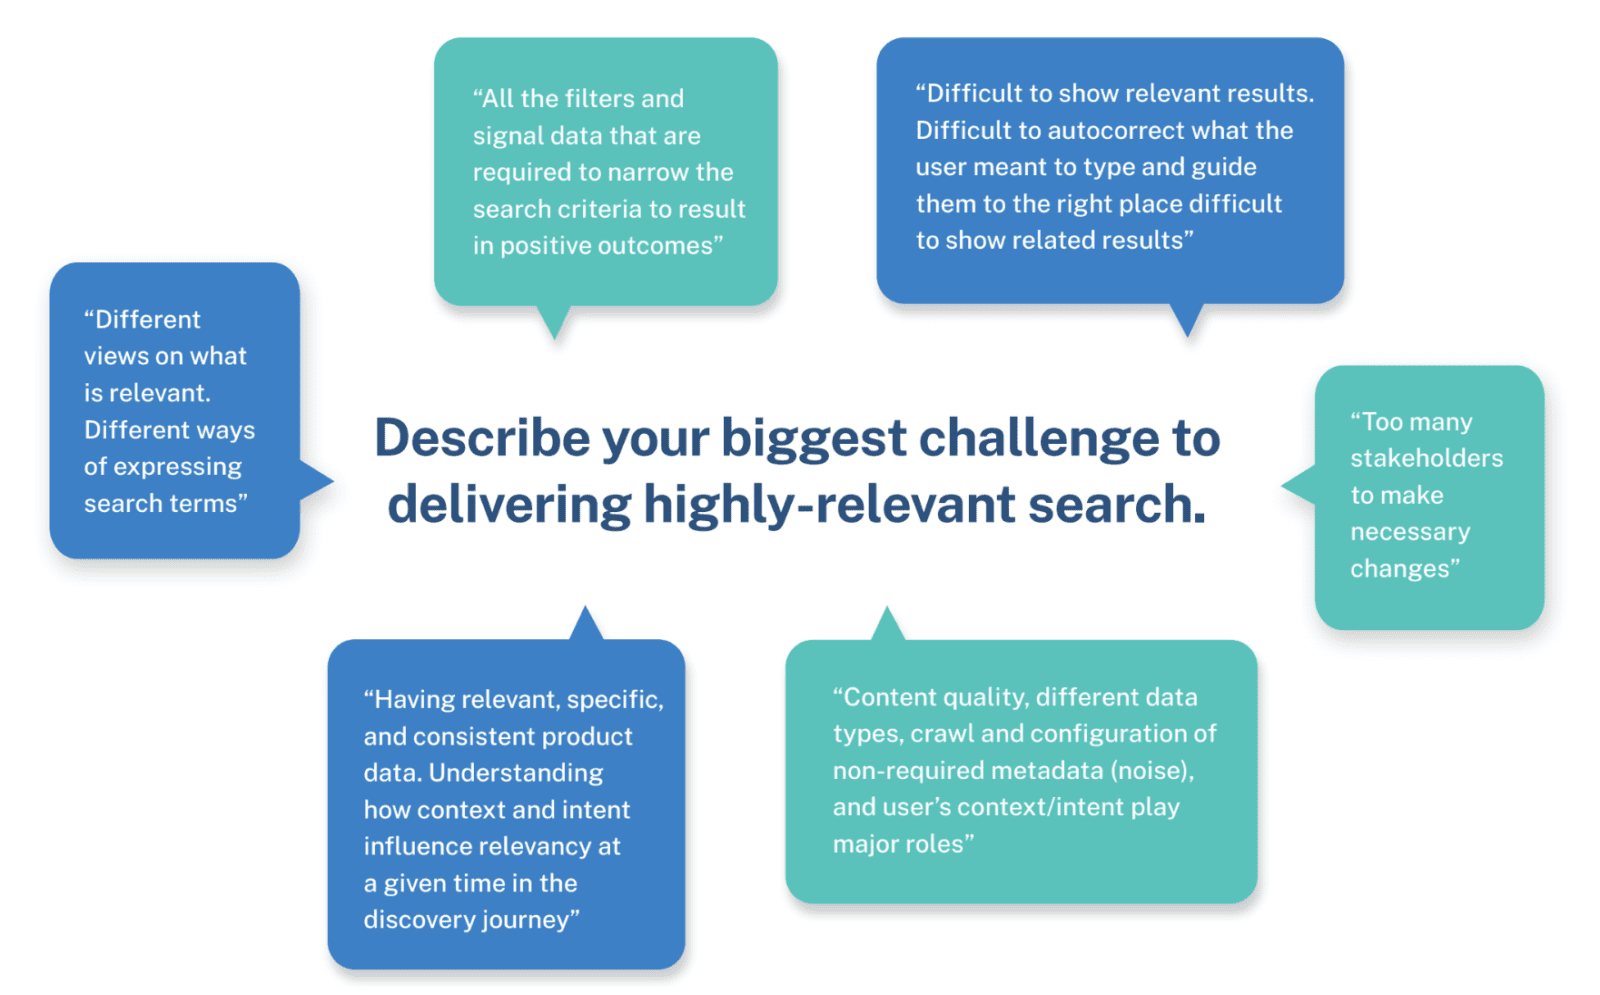 Examples of search practitioners' biggest challenges to delivering highly-relevant search. 